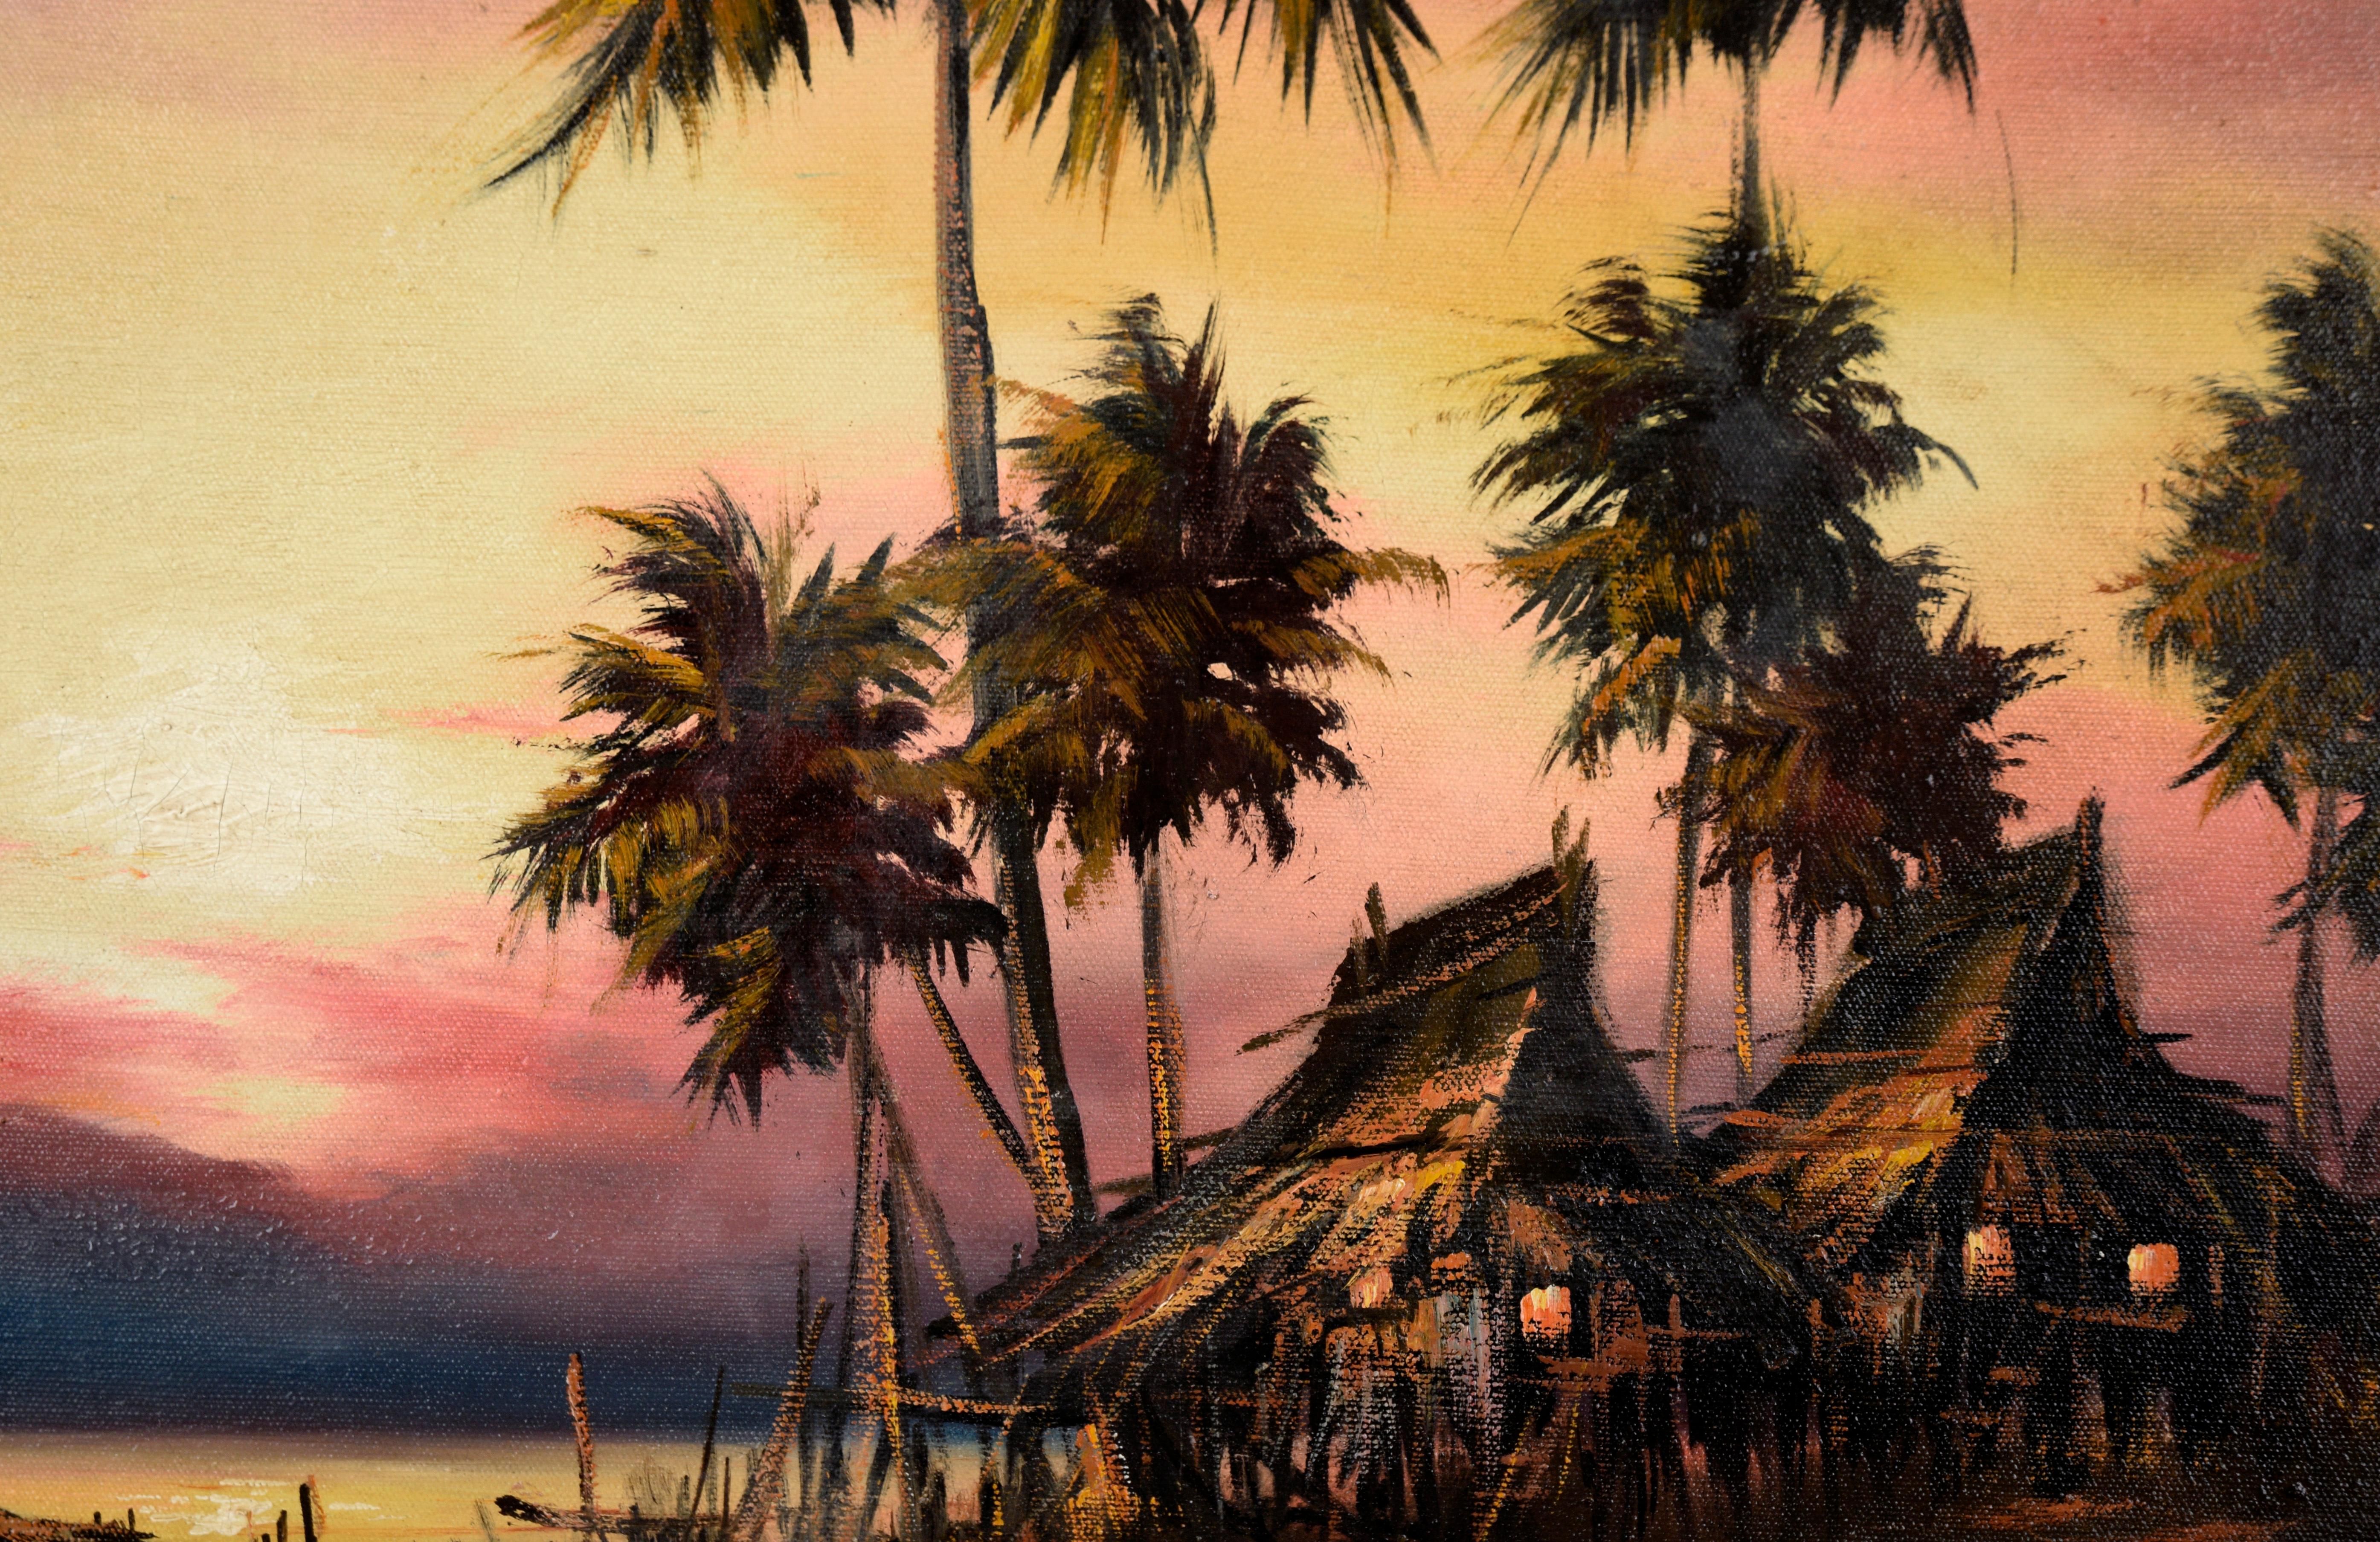 Filipino Fishing Village at Sunset - Tropical Landscape in Oil on Canvas For Sale 1